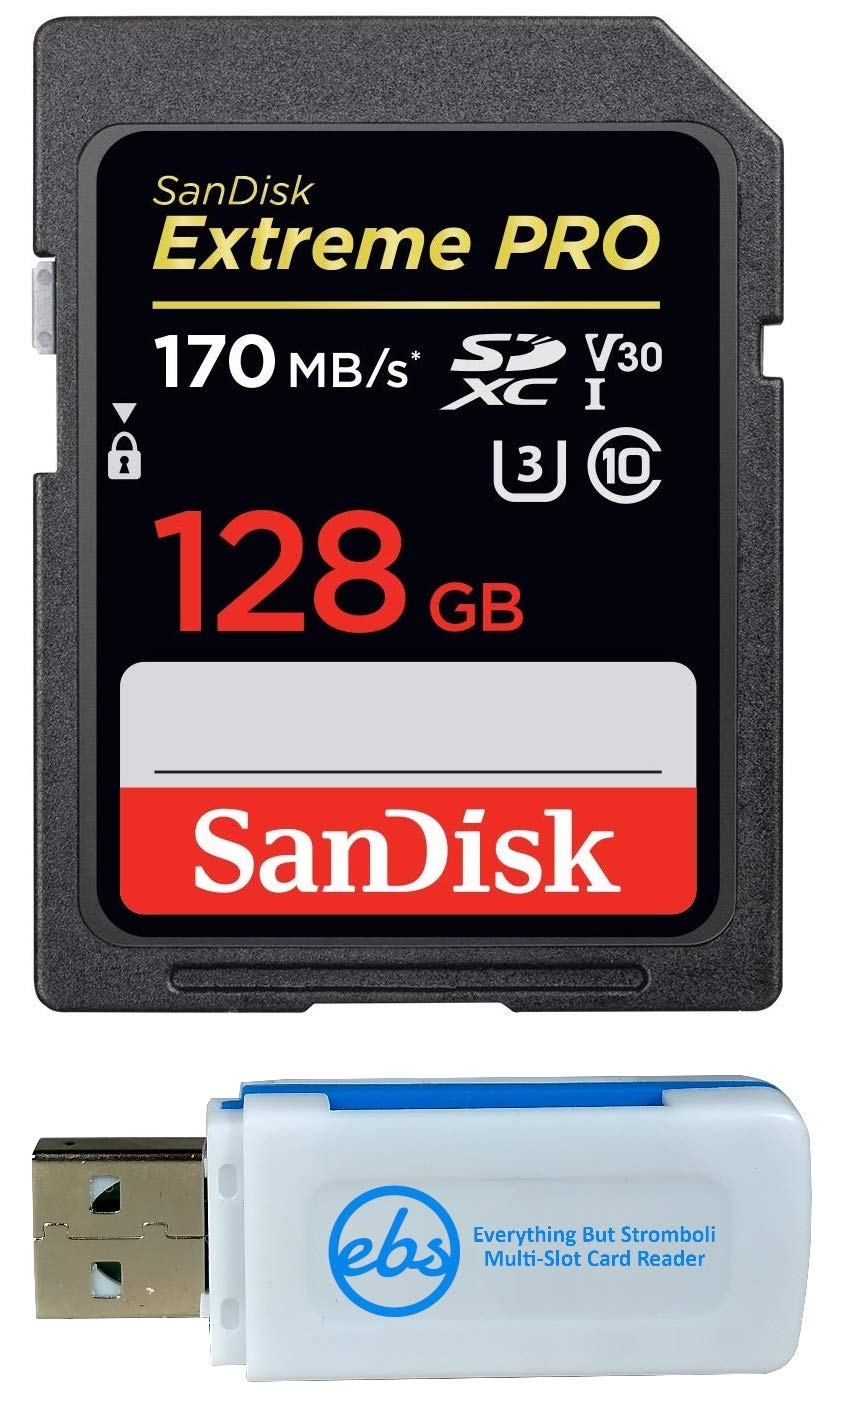 SanDisk 128GB SDXC Extreme Pro Memory Card Works with Sony Alpha a7 III, a7 II, a7, a7s, a7s II Mirrorless Camera 4K V30 UHS-I (SDSDXXY-128G-GN4IN) Plus (1) Everything But Stromboli (TM) Combo Reader Class 10 128GB